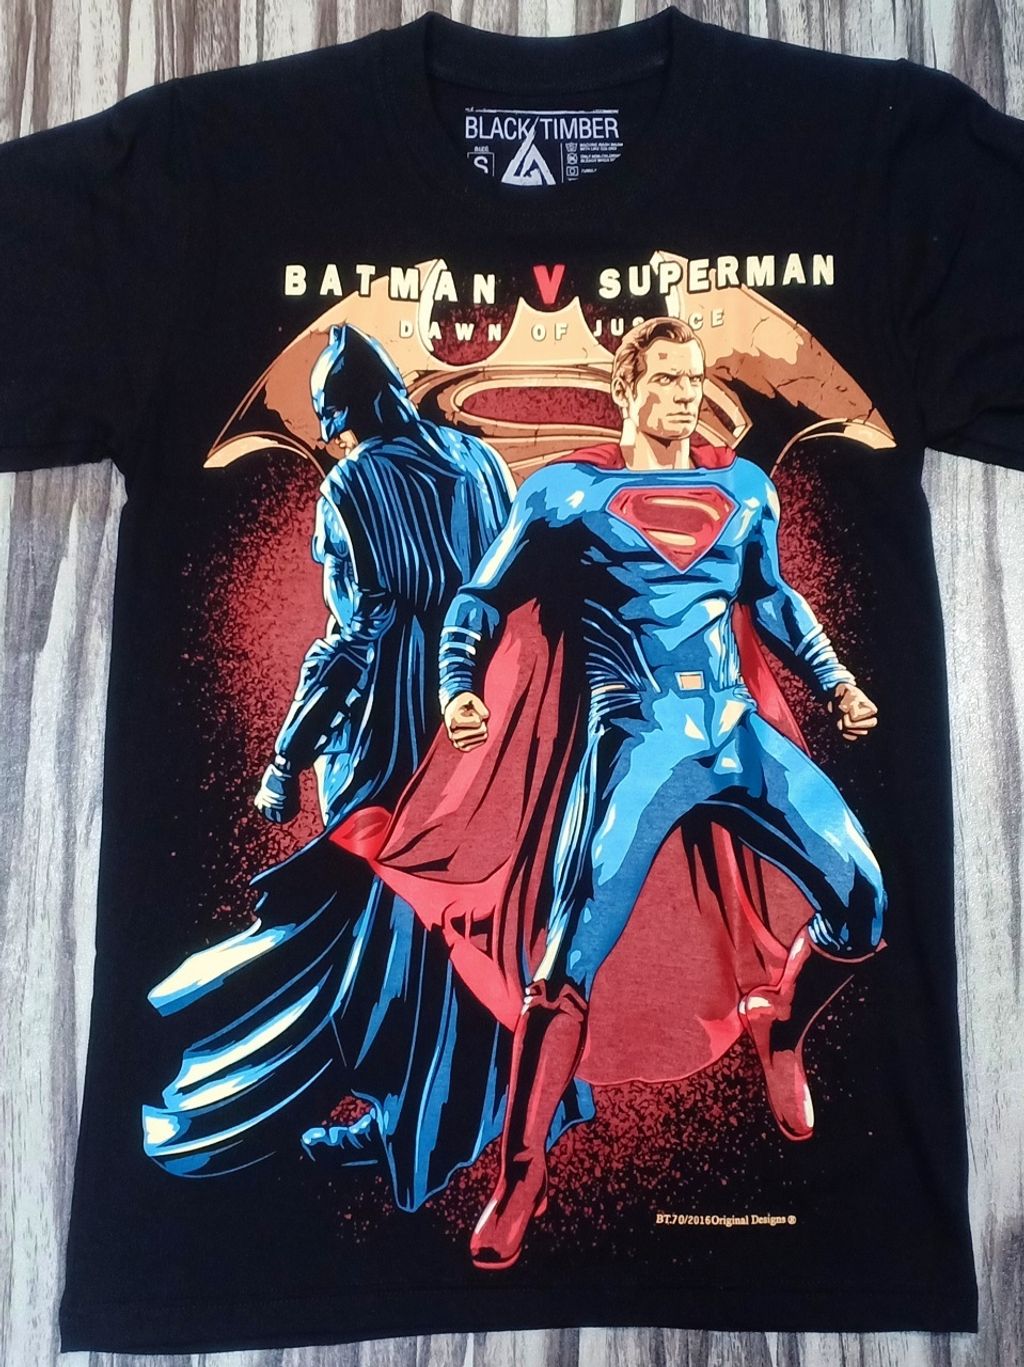 BT70 BATMAN VS SUPERMAN DAWN OF JUSTICE DC COMIC HERO VINTAGE COLLECTION  ORIGINAL BLACK TIMBER COTTON T-SHIRT – BLACK TIMBER NEW TYPE SYSTEM MOAI  SPEED PREMIUM GRADE HIGH QUALITY SILK SCREEN COLLECTABLE